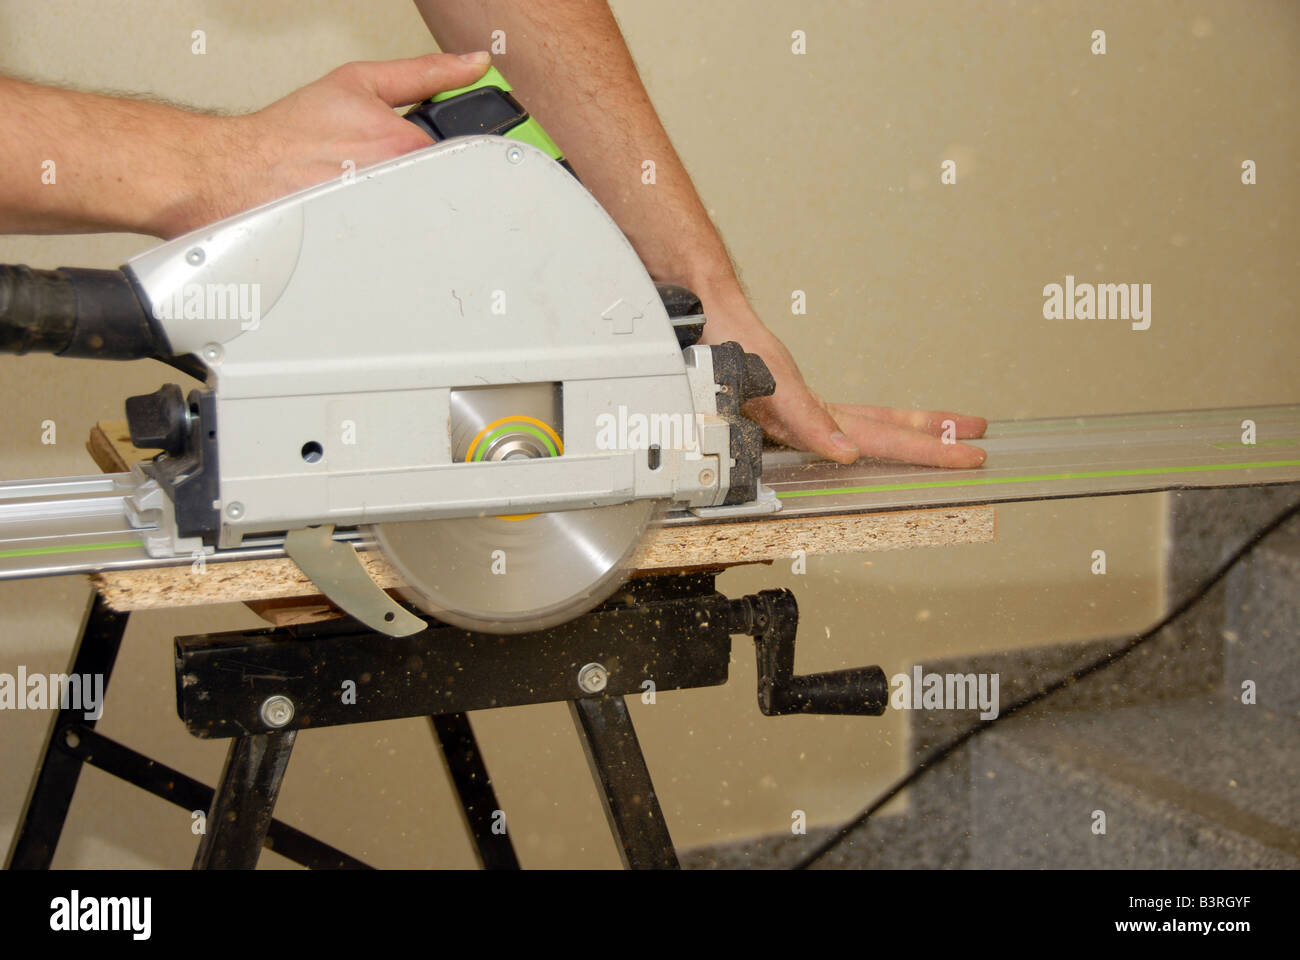 https://c8.alamy.com/comp/B3RGYF/carpenter-hand-and-saw-in-time-of-work-B3RGYF.jpg